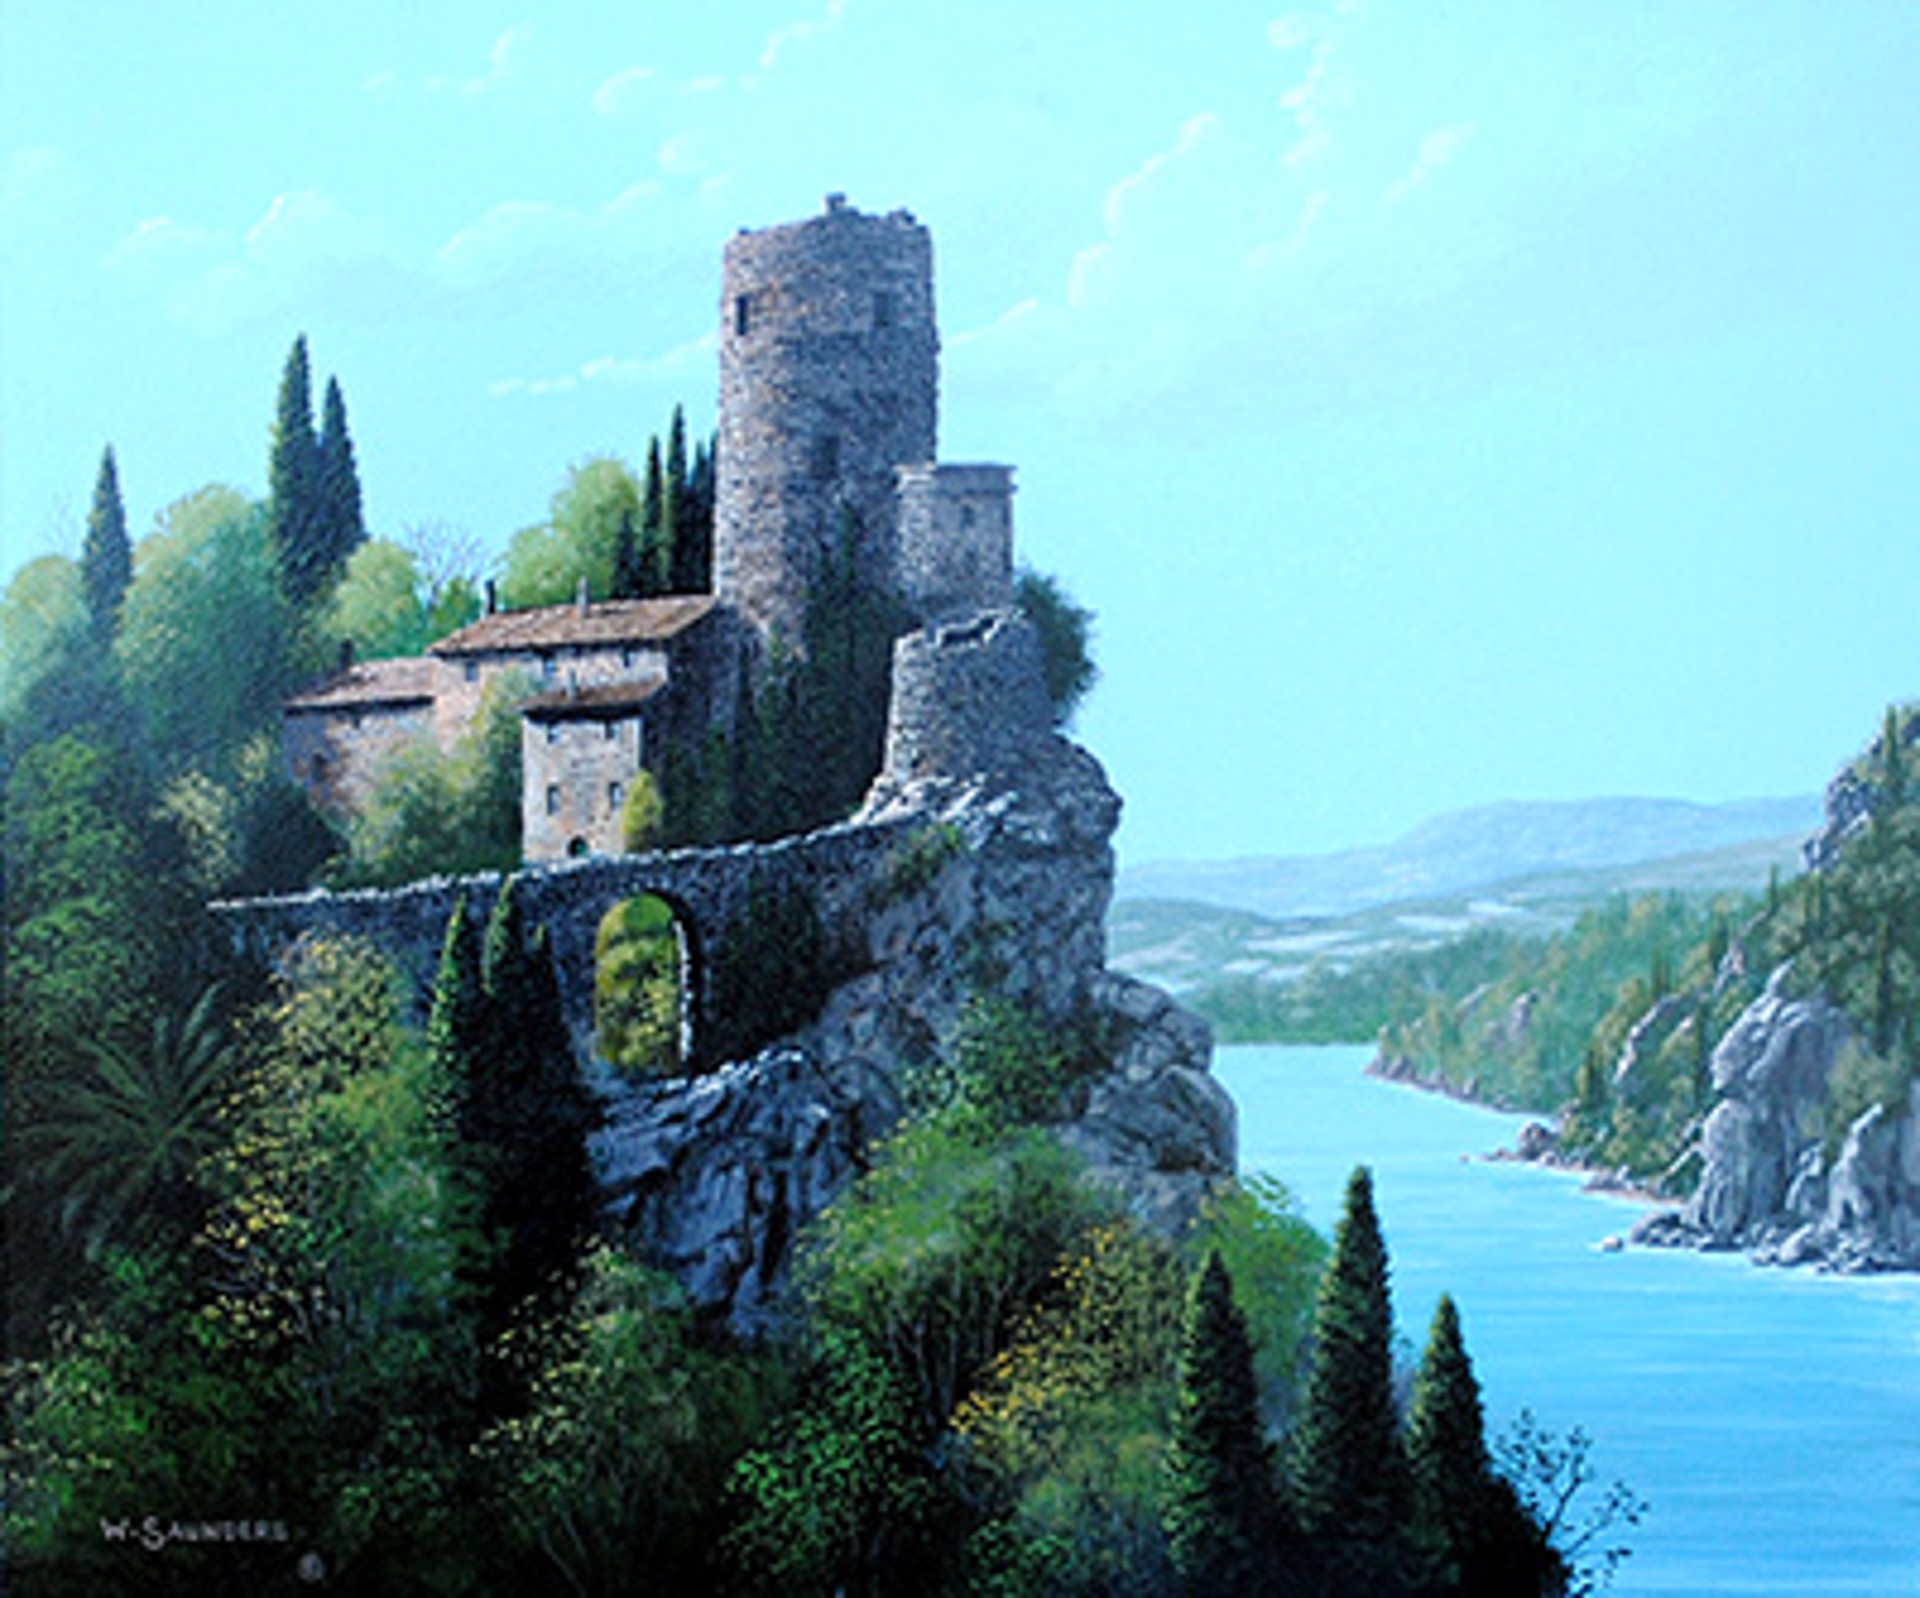 Old Castles in the Sky 175485 by Bill Saunders